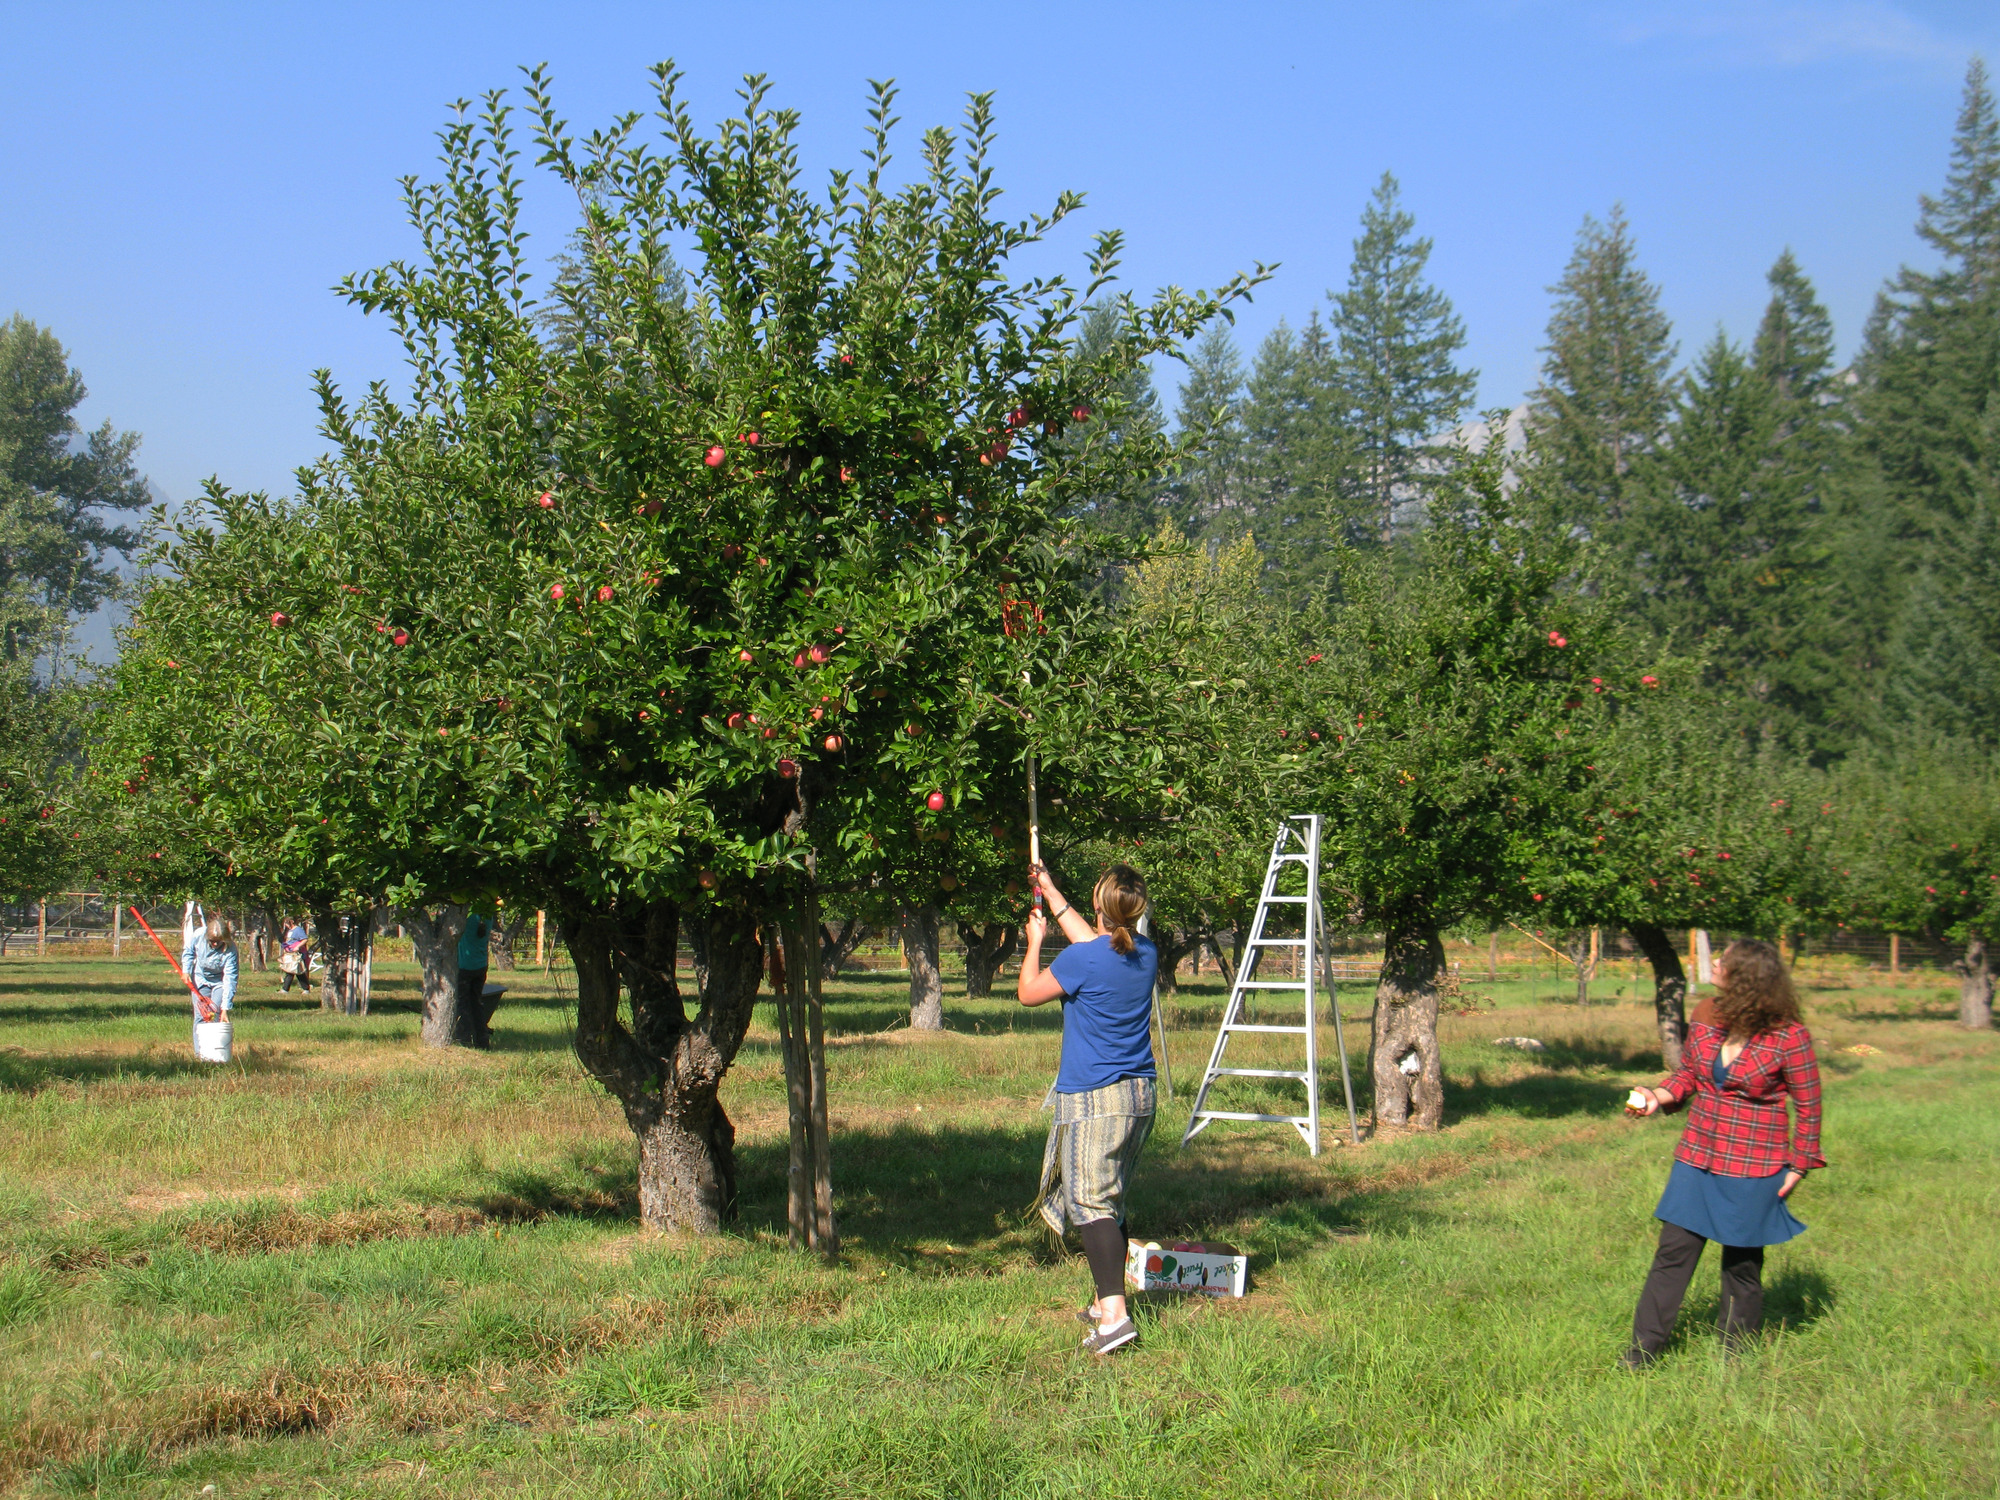 Two people use a picker to pick apples in an orchard.